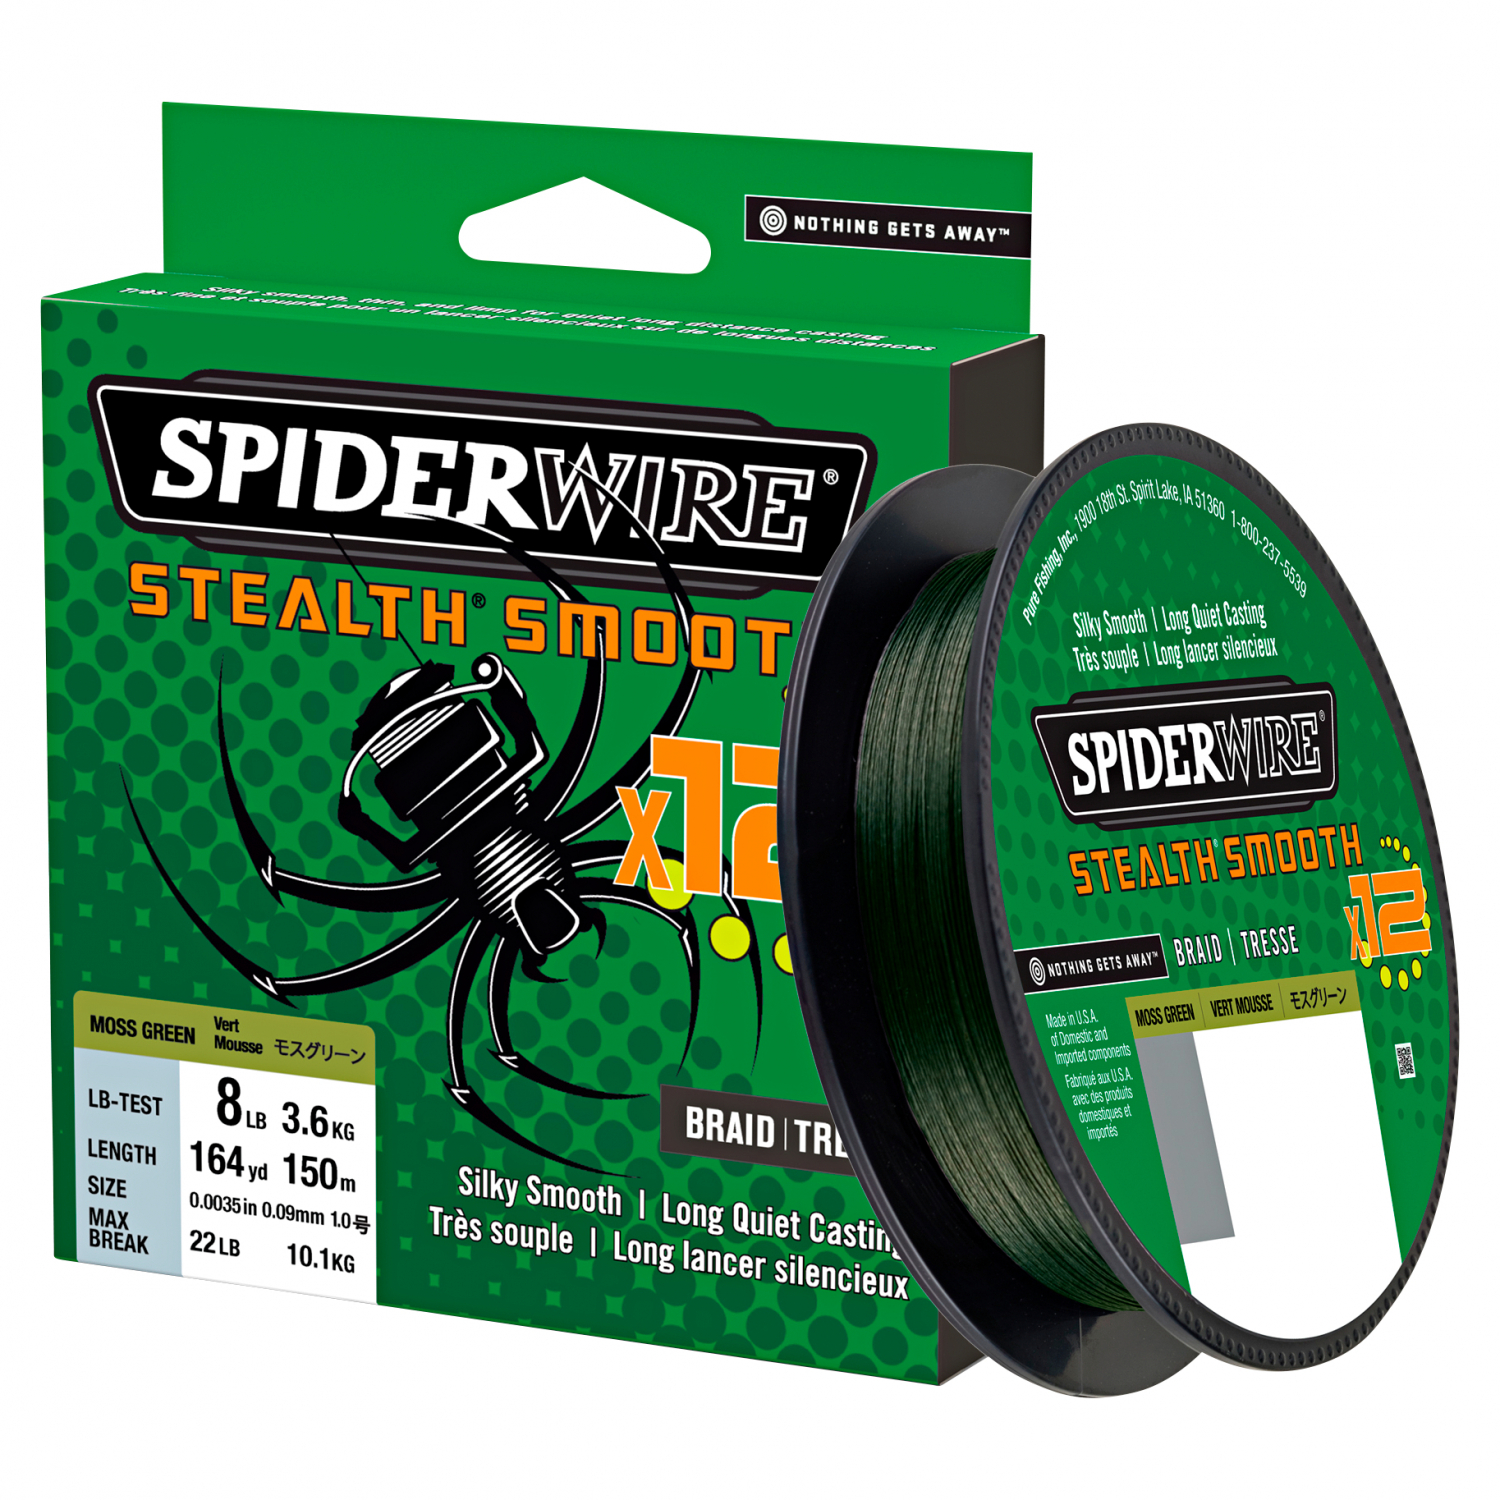 Spiderwire Fishing Line Stealth Smooth 12 Braid (Moss Green, 150 m) 